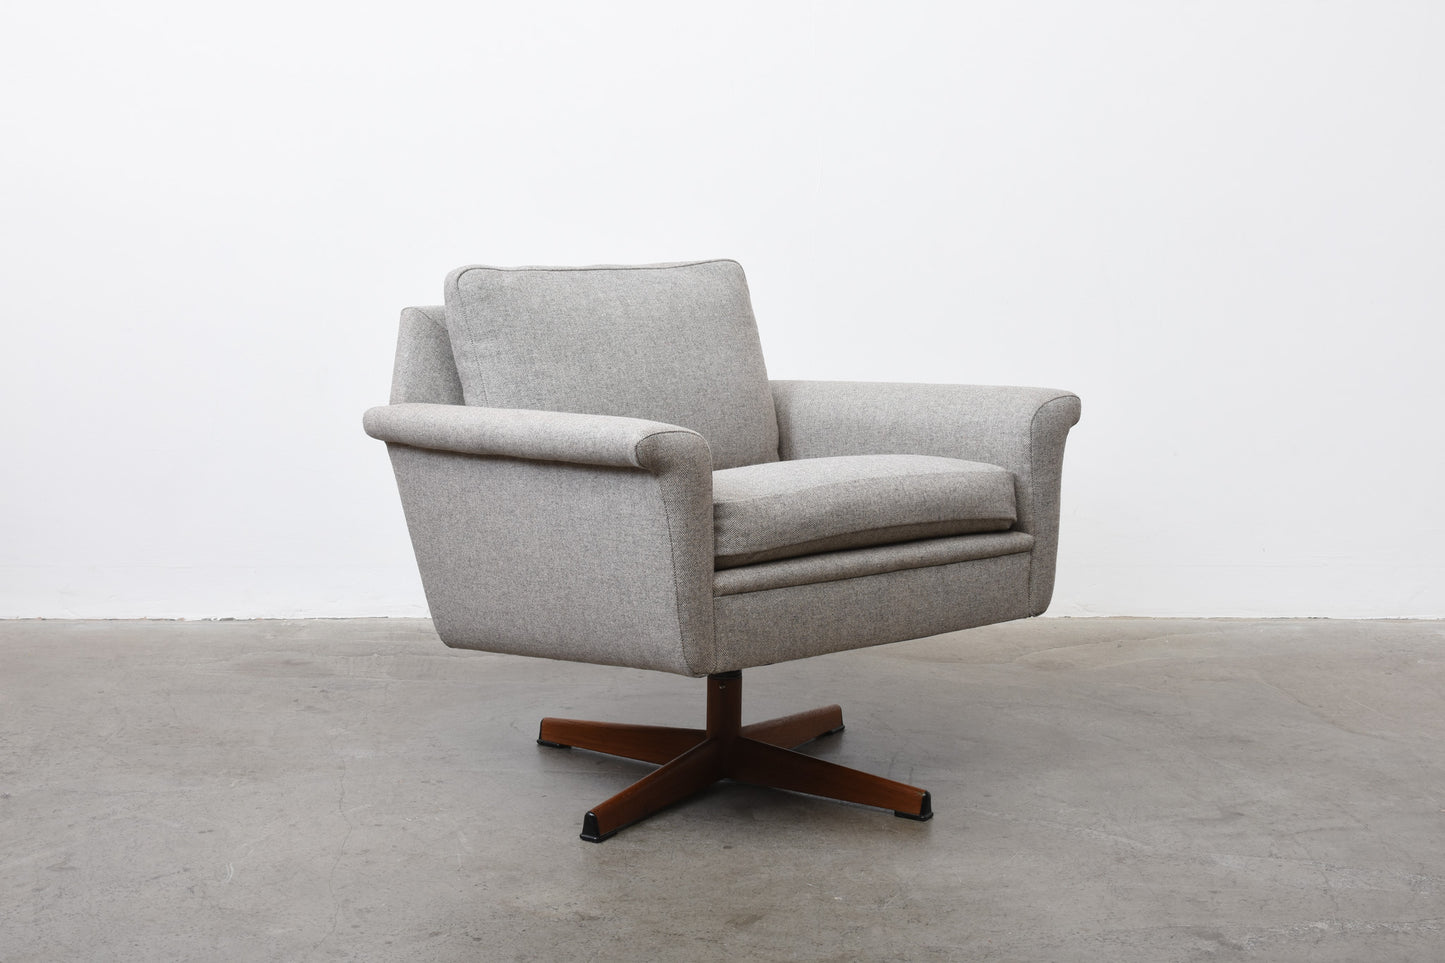 Newly upholstered: 1960s swivel chair in wool